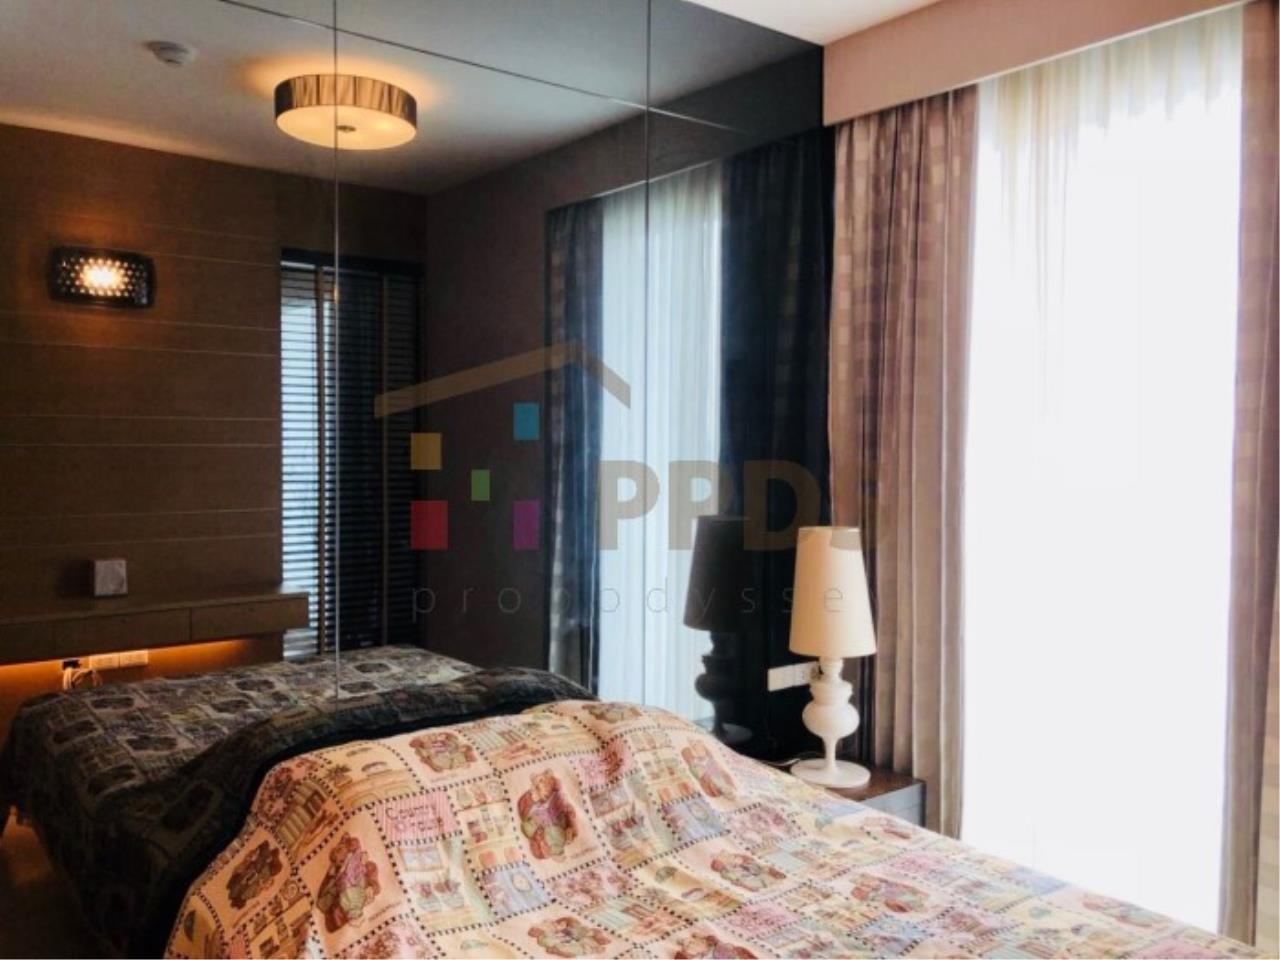 One bedroom condo for rent nice decoration and river view on Road, ภาพที่ 4